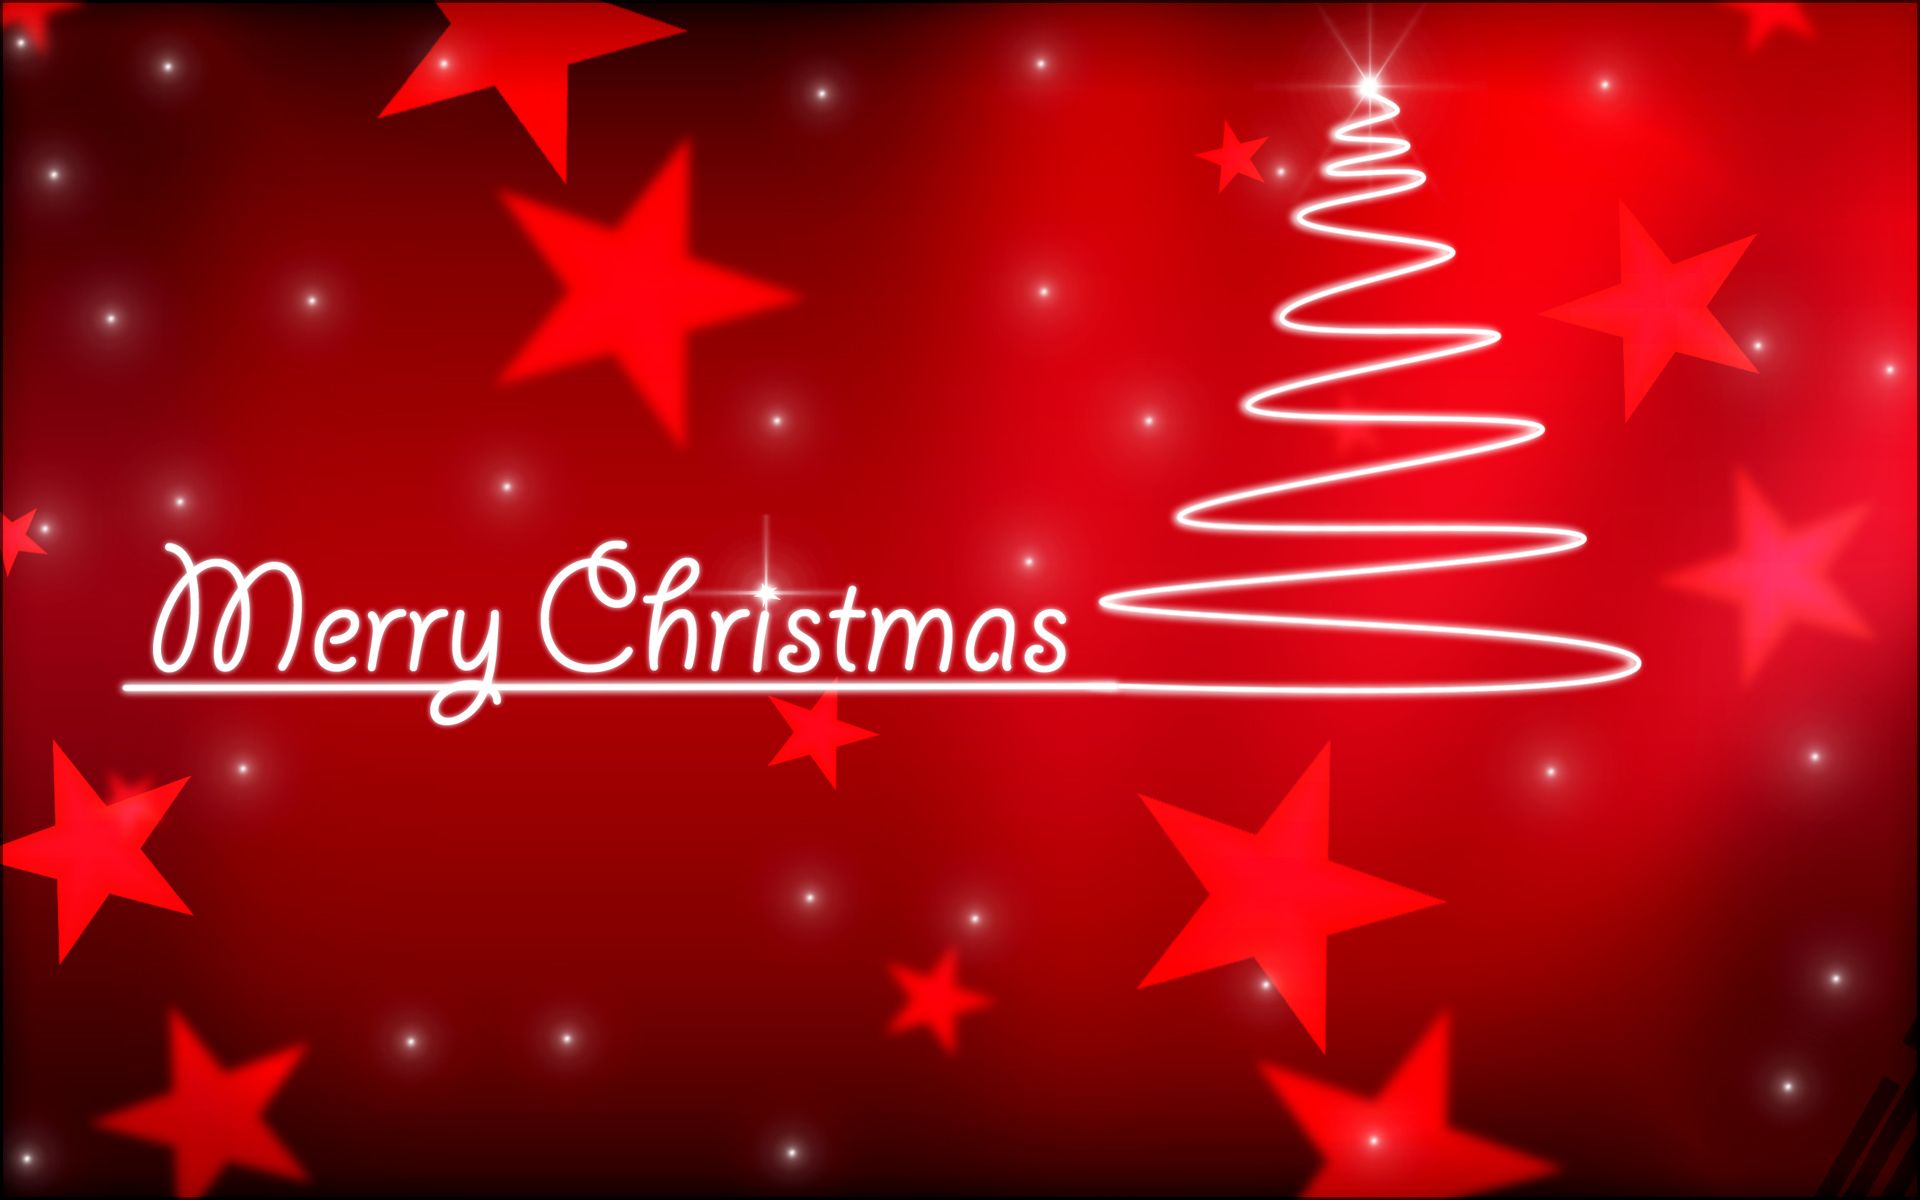 Merry Christmas wallpapers red 2015 free download | Wallpapers ...